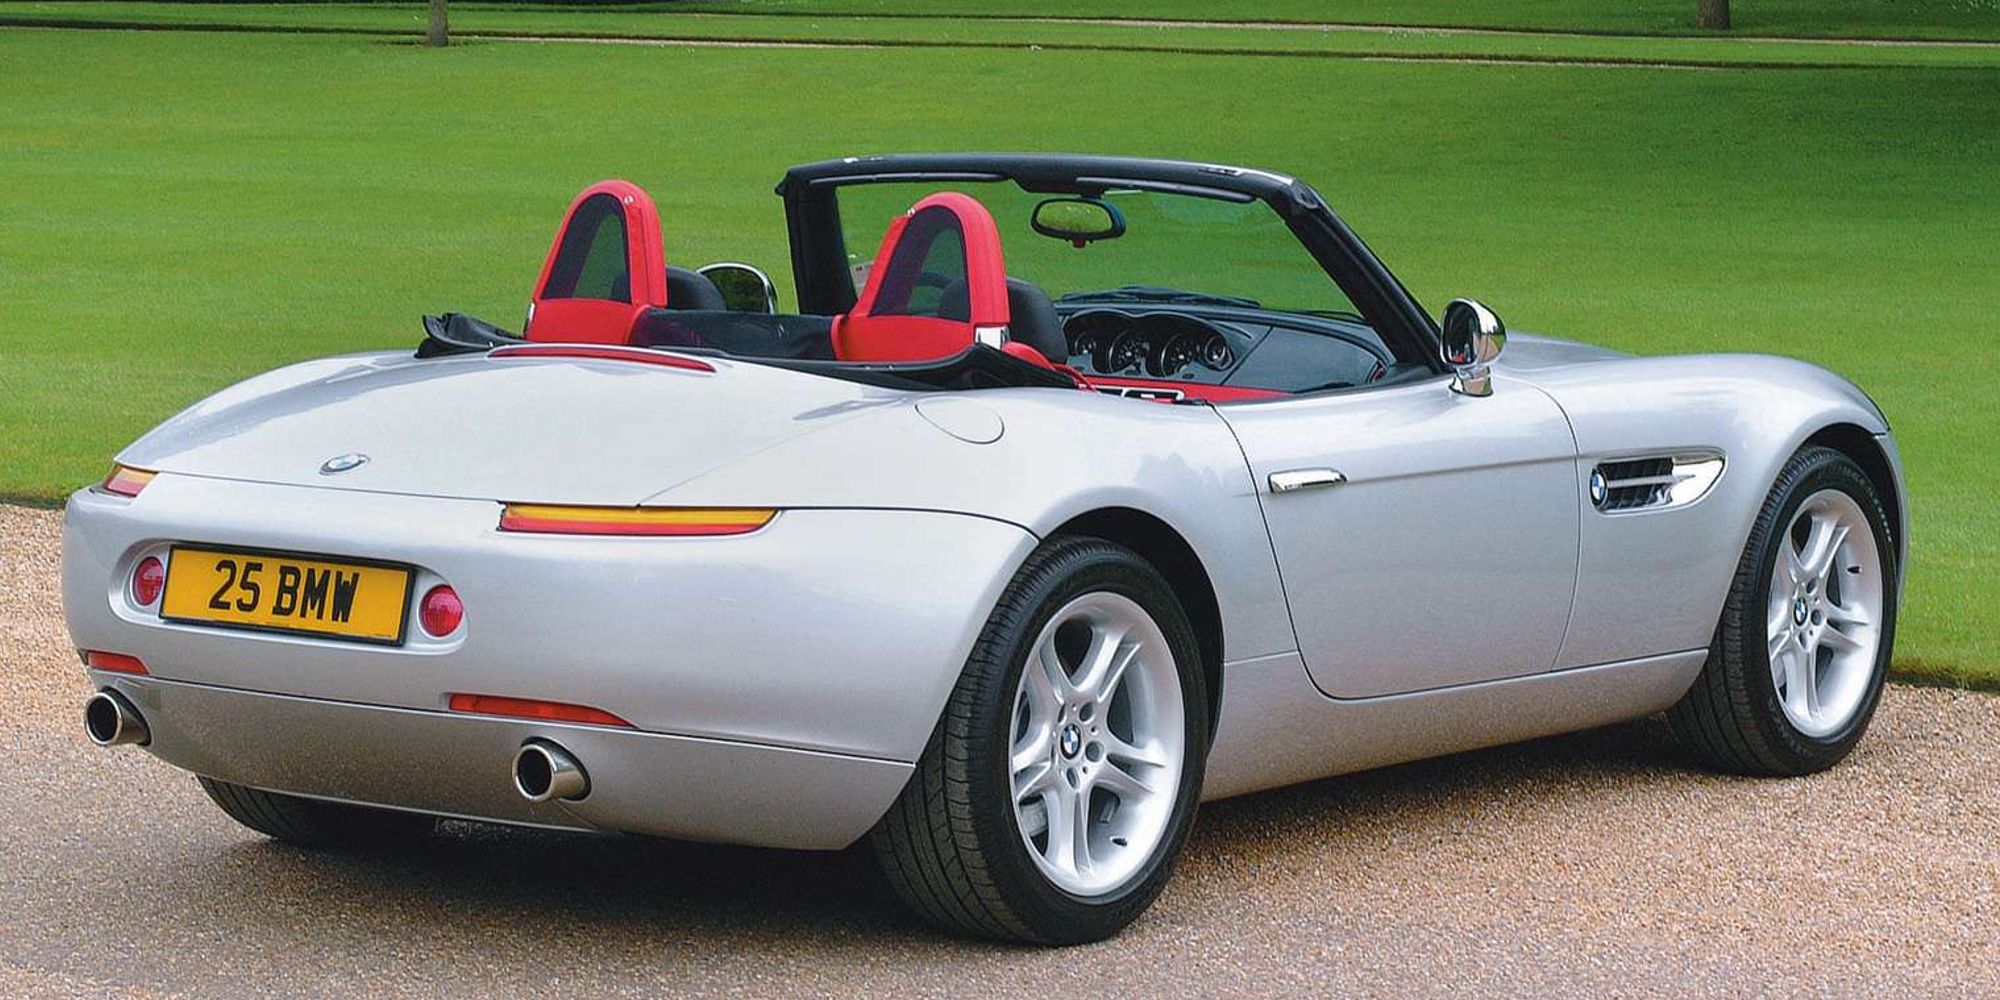 Rear 3/4 view of the Z8